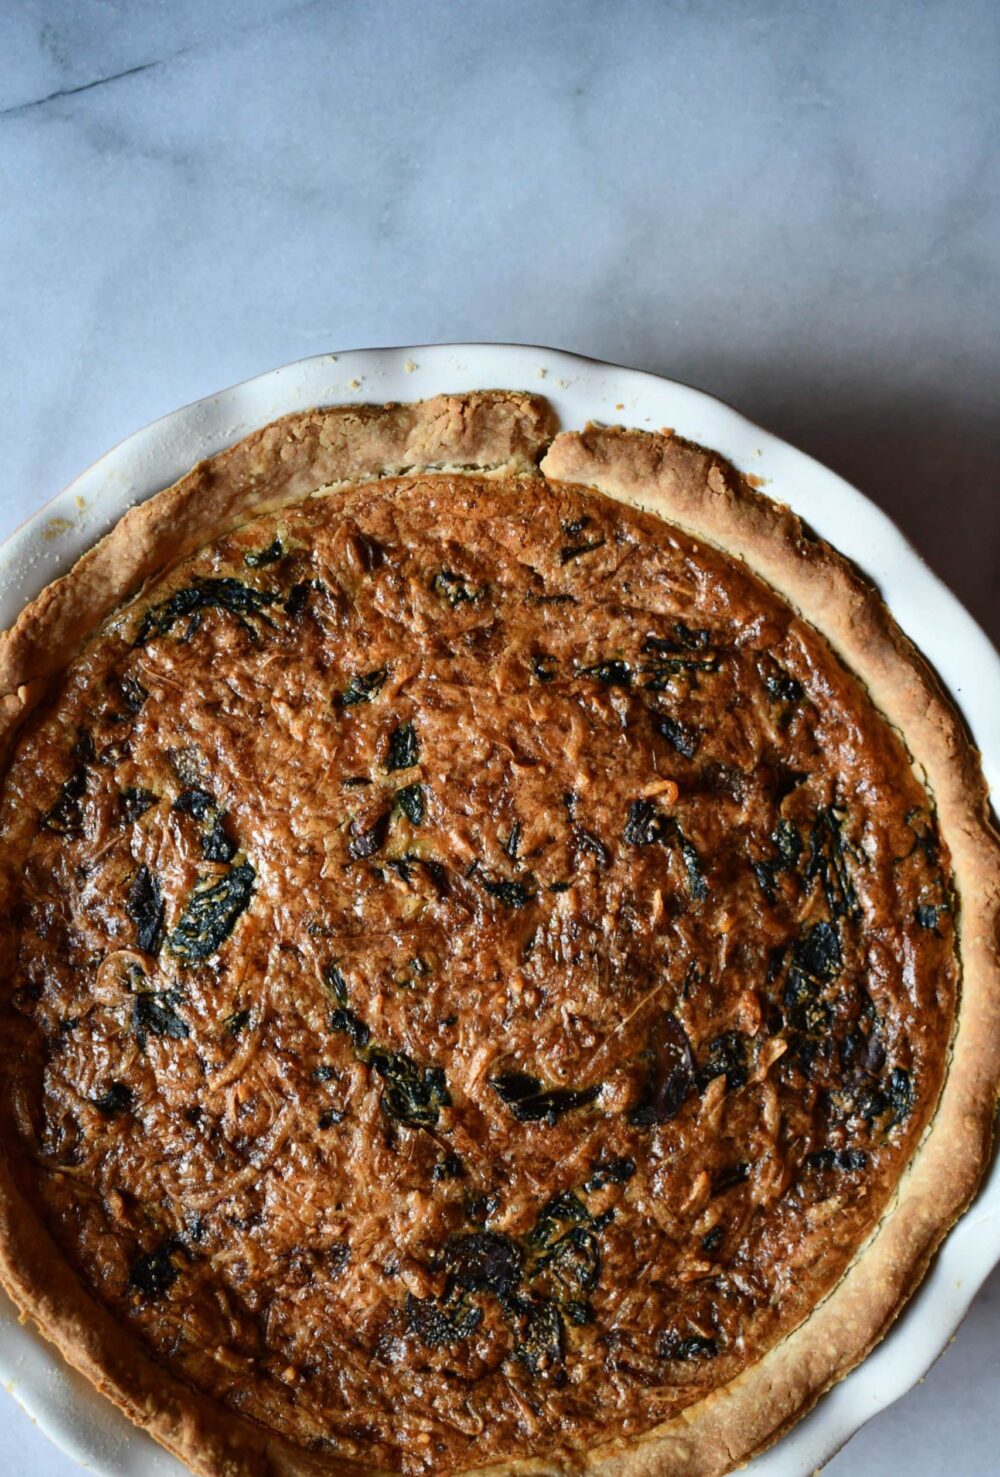 Joanna Gaines Mushroom, Spinach and Swiss Cheese Quiche